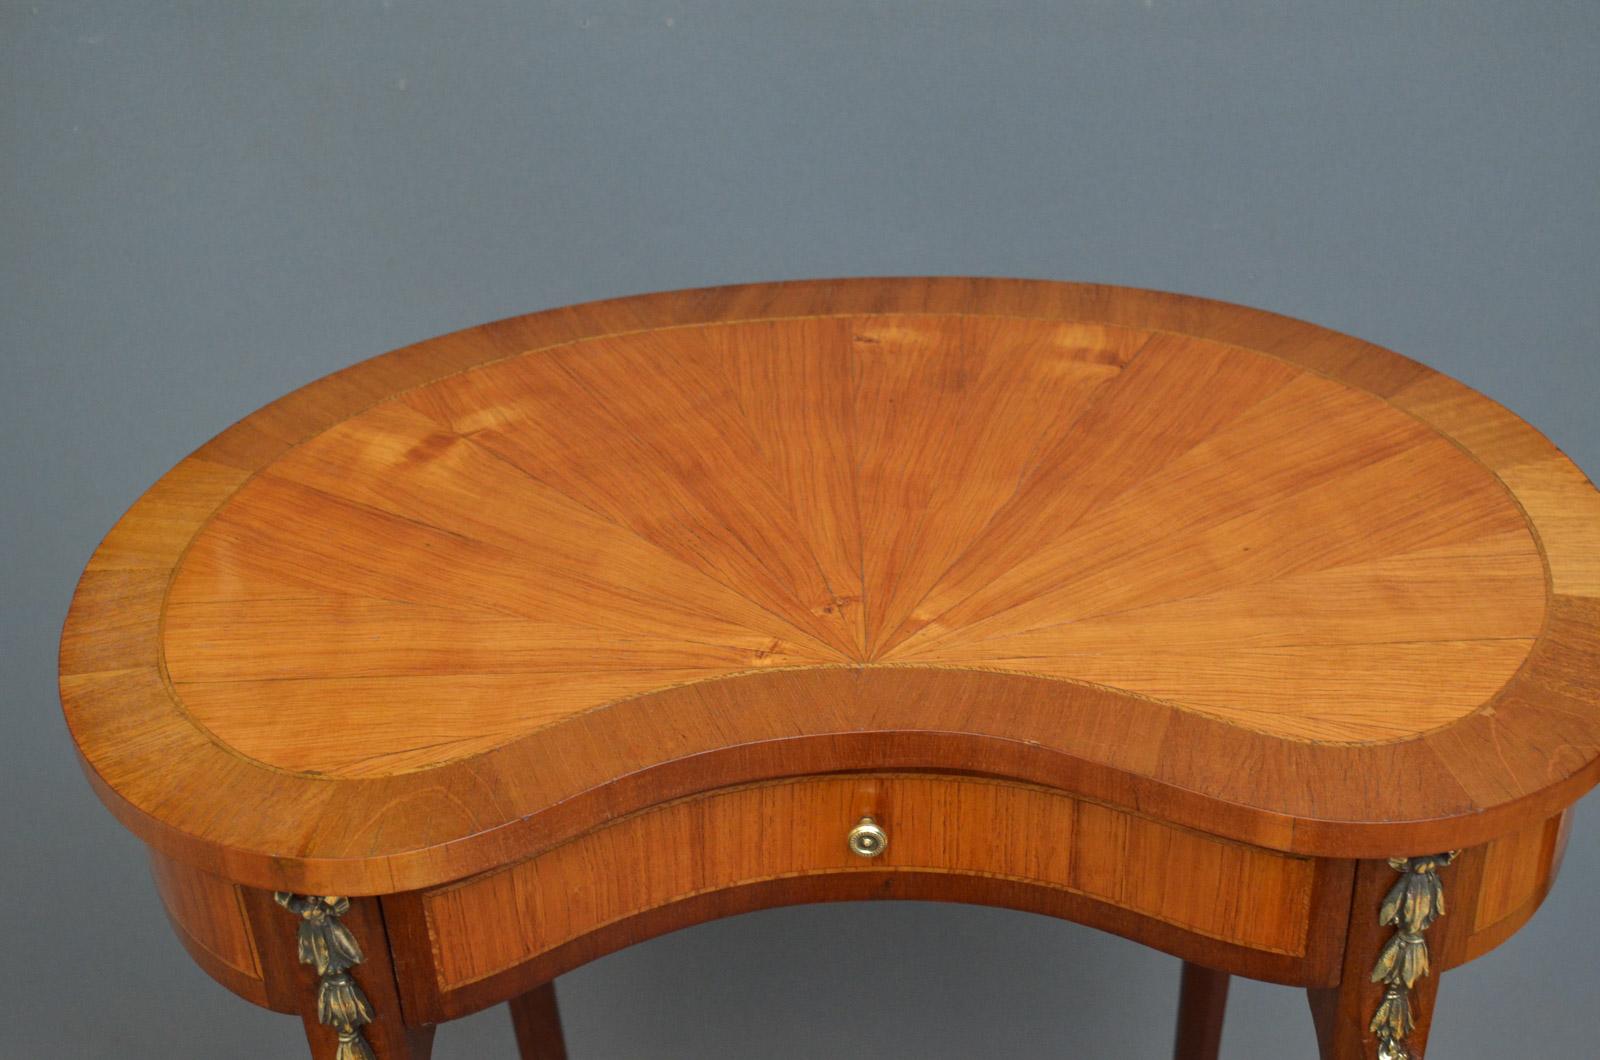 Sn3880, An attractive Continental, kidney shaped occasional table in satinwood, having segmented top and inlaid frieze with practical drawer flanked by ormolu raise on slender cabriole legs with brass sabots. This stunning occasional / lamp table is